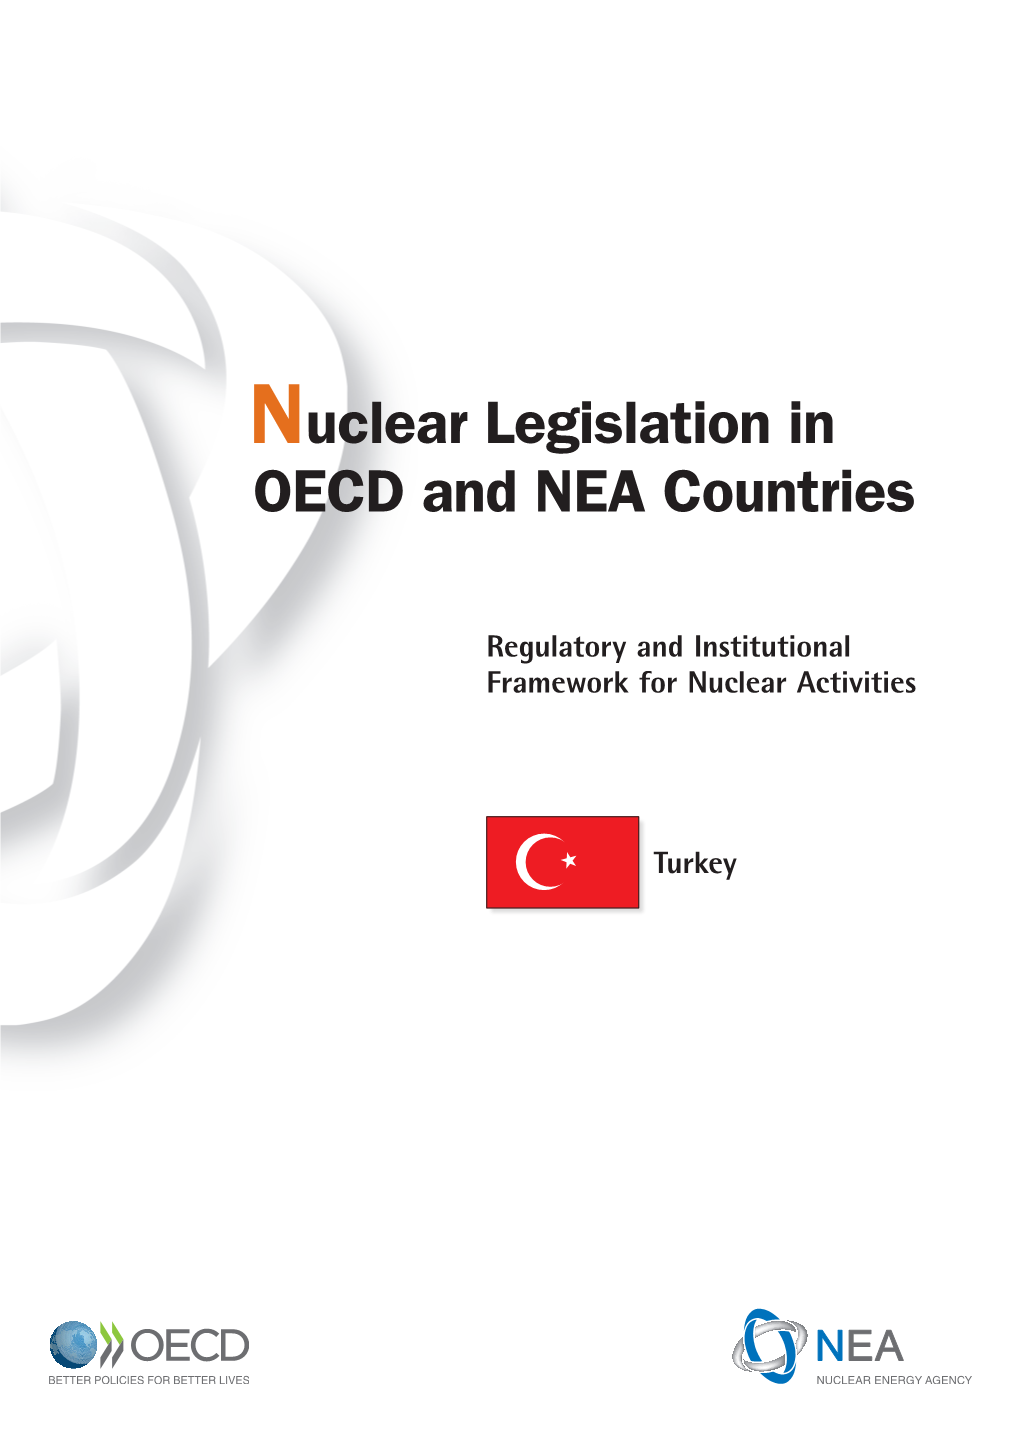 Nuclear Legislation in OECD and NEA Countries